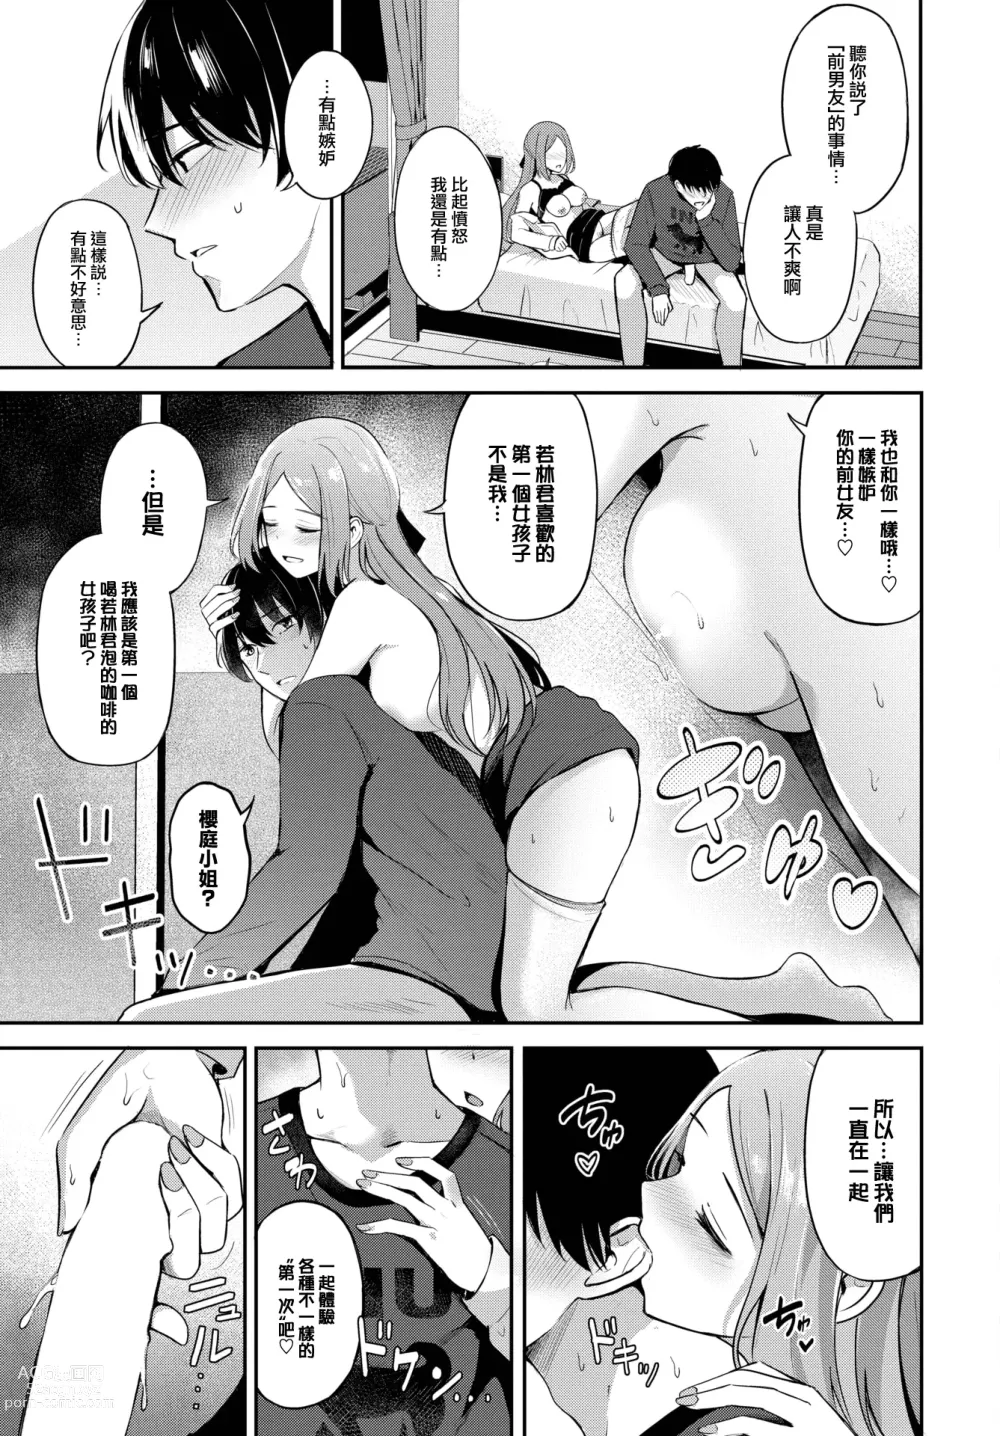 Page 18 of manga Nigakute Amai Coffee no you ni - Its fragrance is very special...